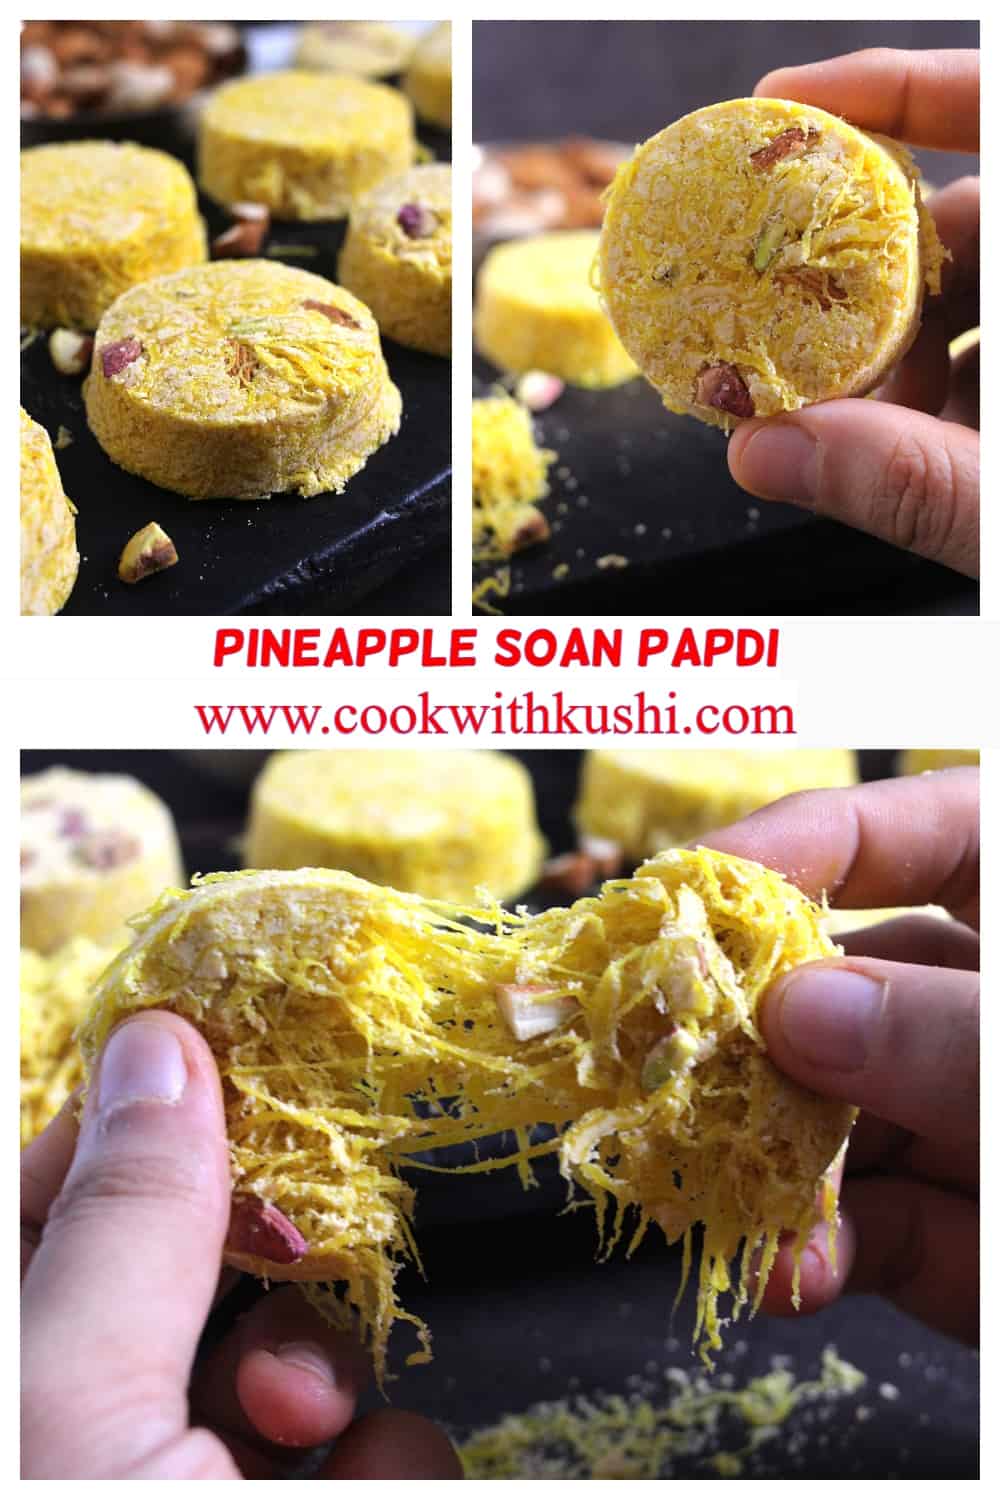 images showing pineapple soan papdi prepared at home from scratch. 